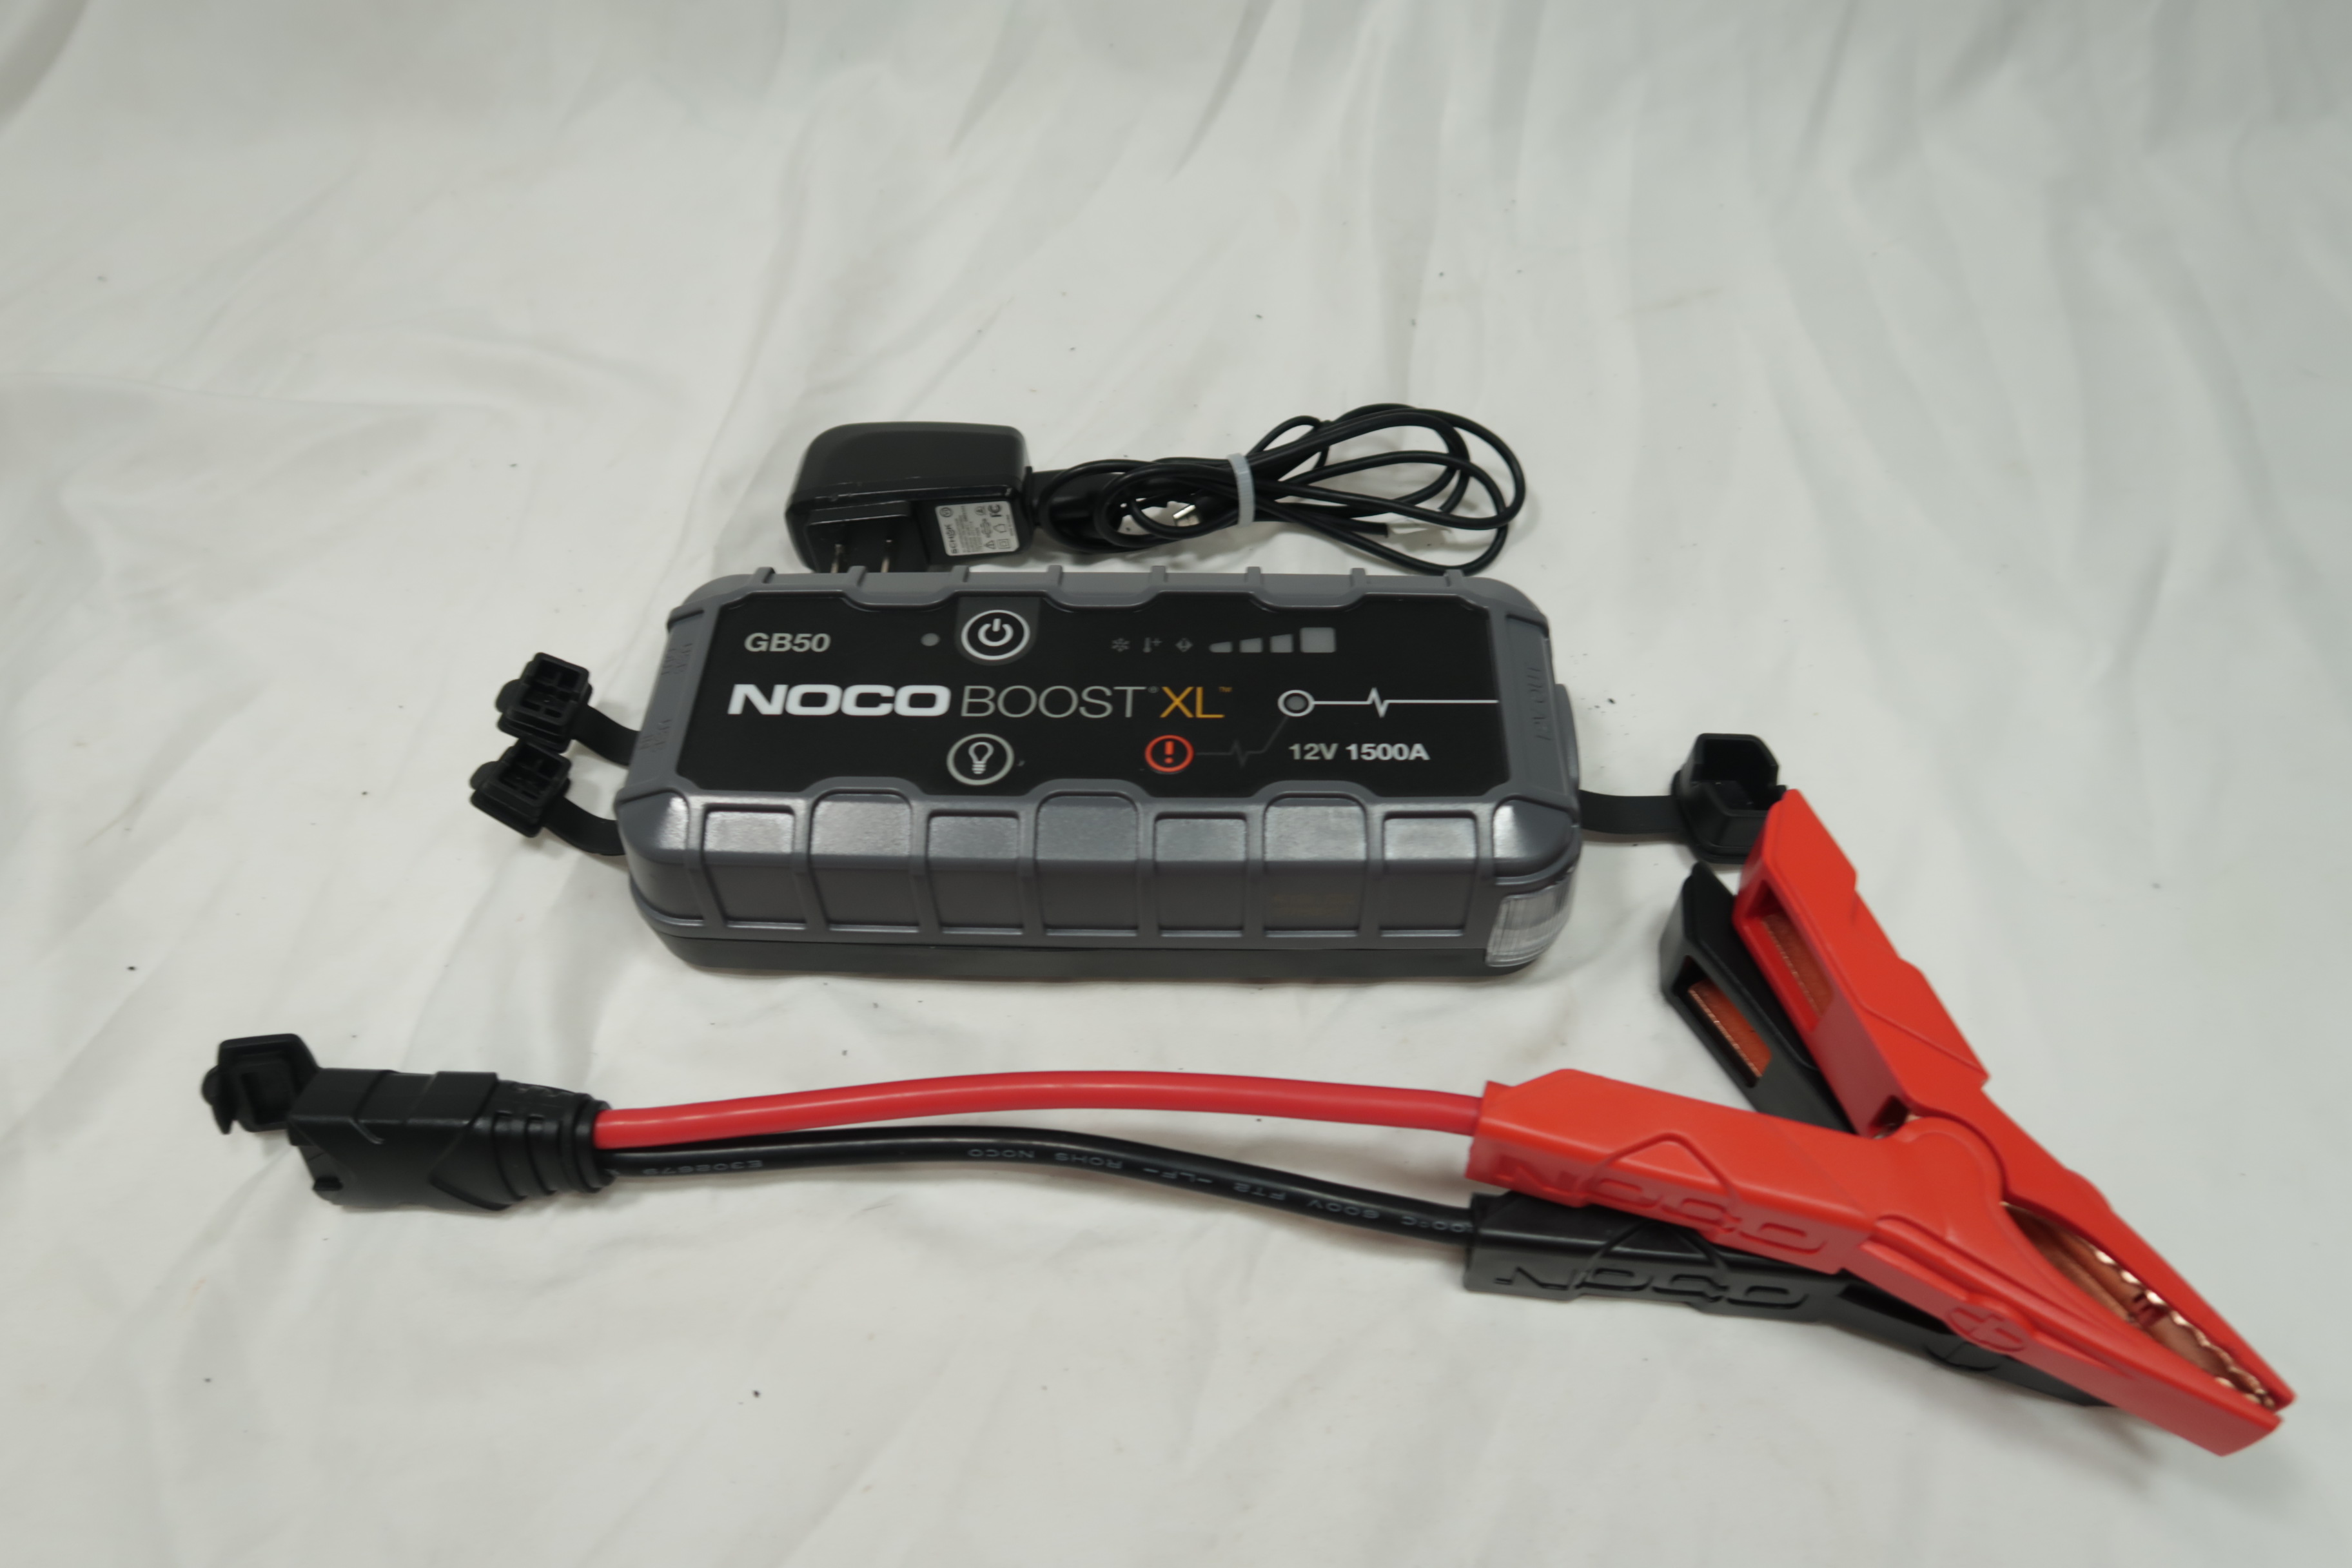 Noco Boost XL GB50 1500 Amp 12V Jump Starter Power Bank Charger